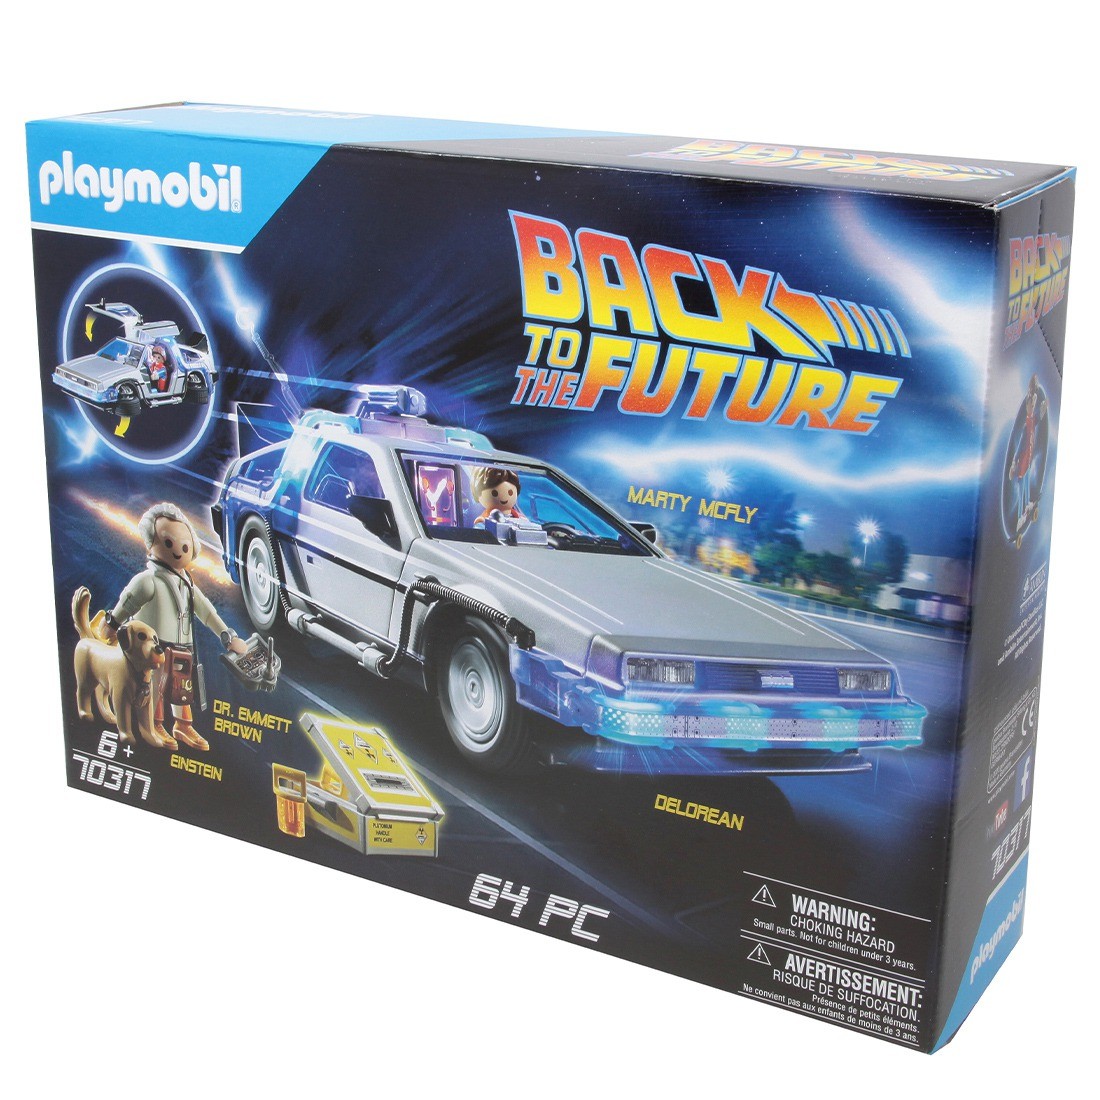 Playmobil Back to The Future Delorean : Toys & Games 